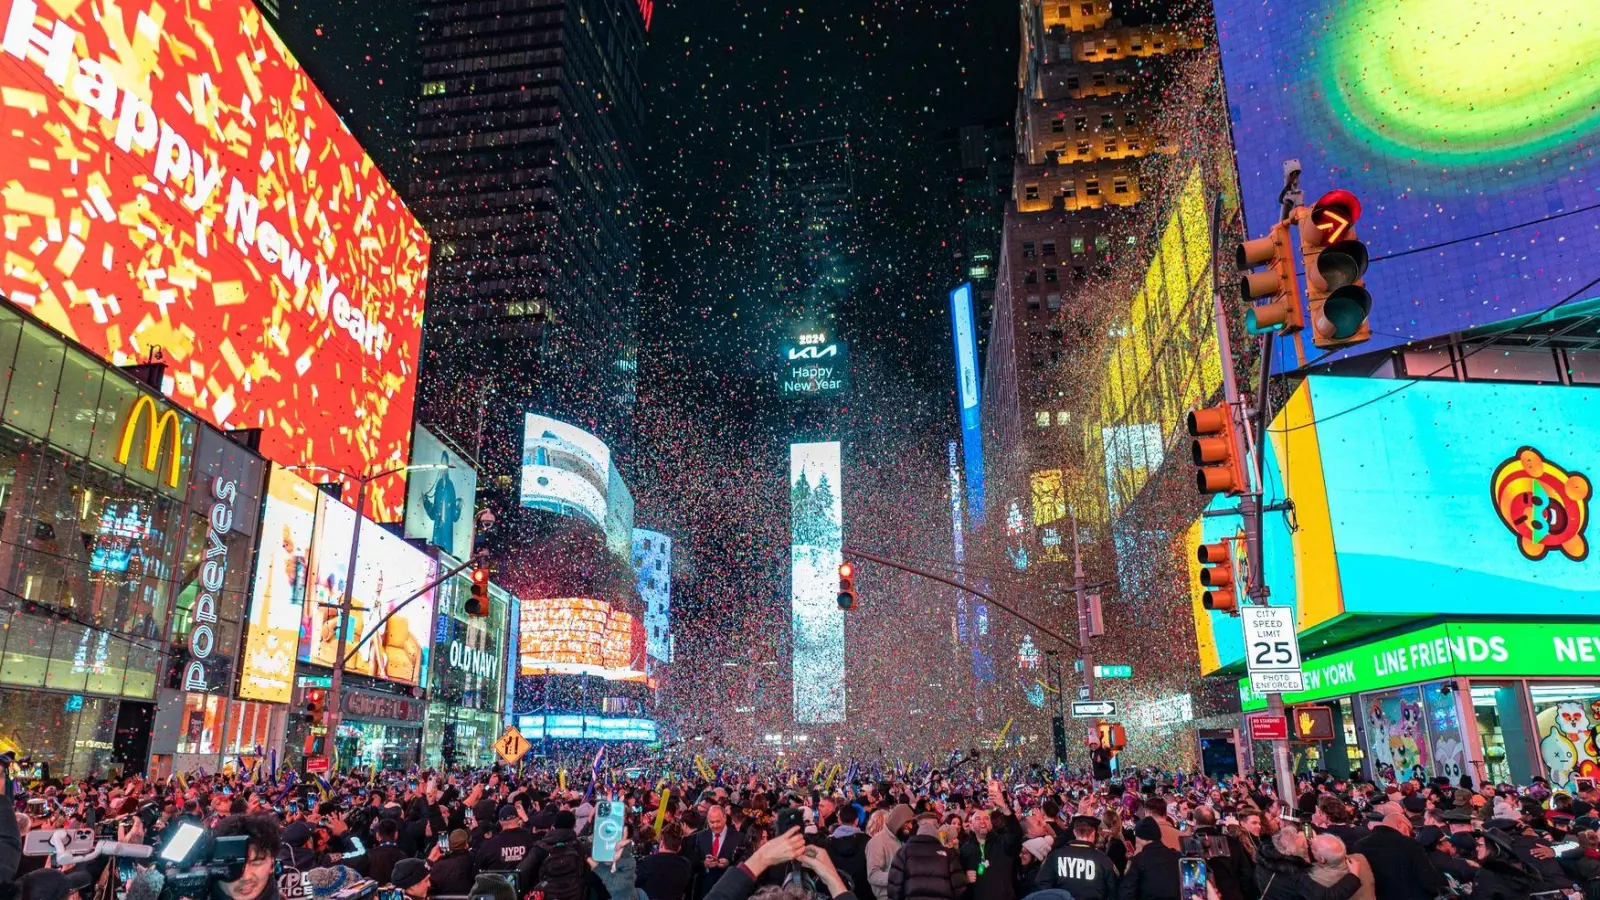 Silvesterfeier am Times Square in New York. (Foto: Peter K. Afriyie/AP/dpa)